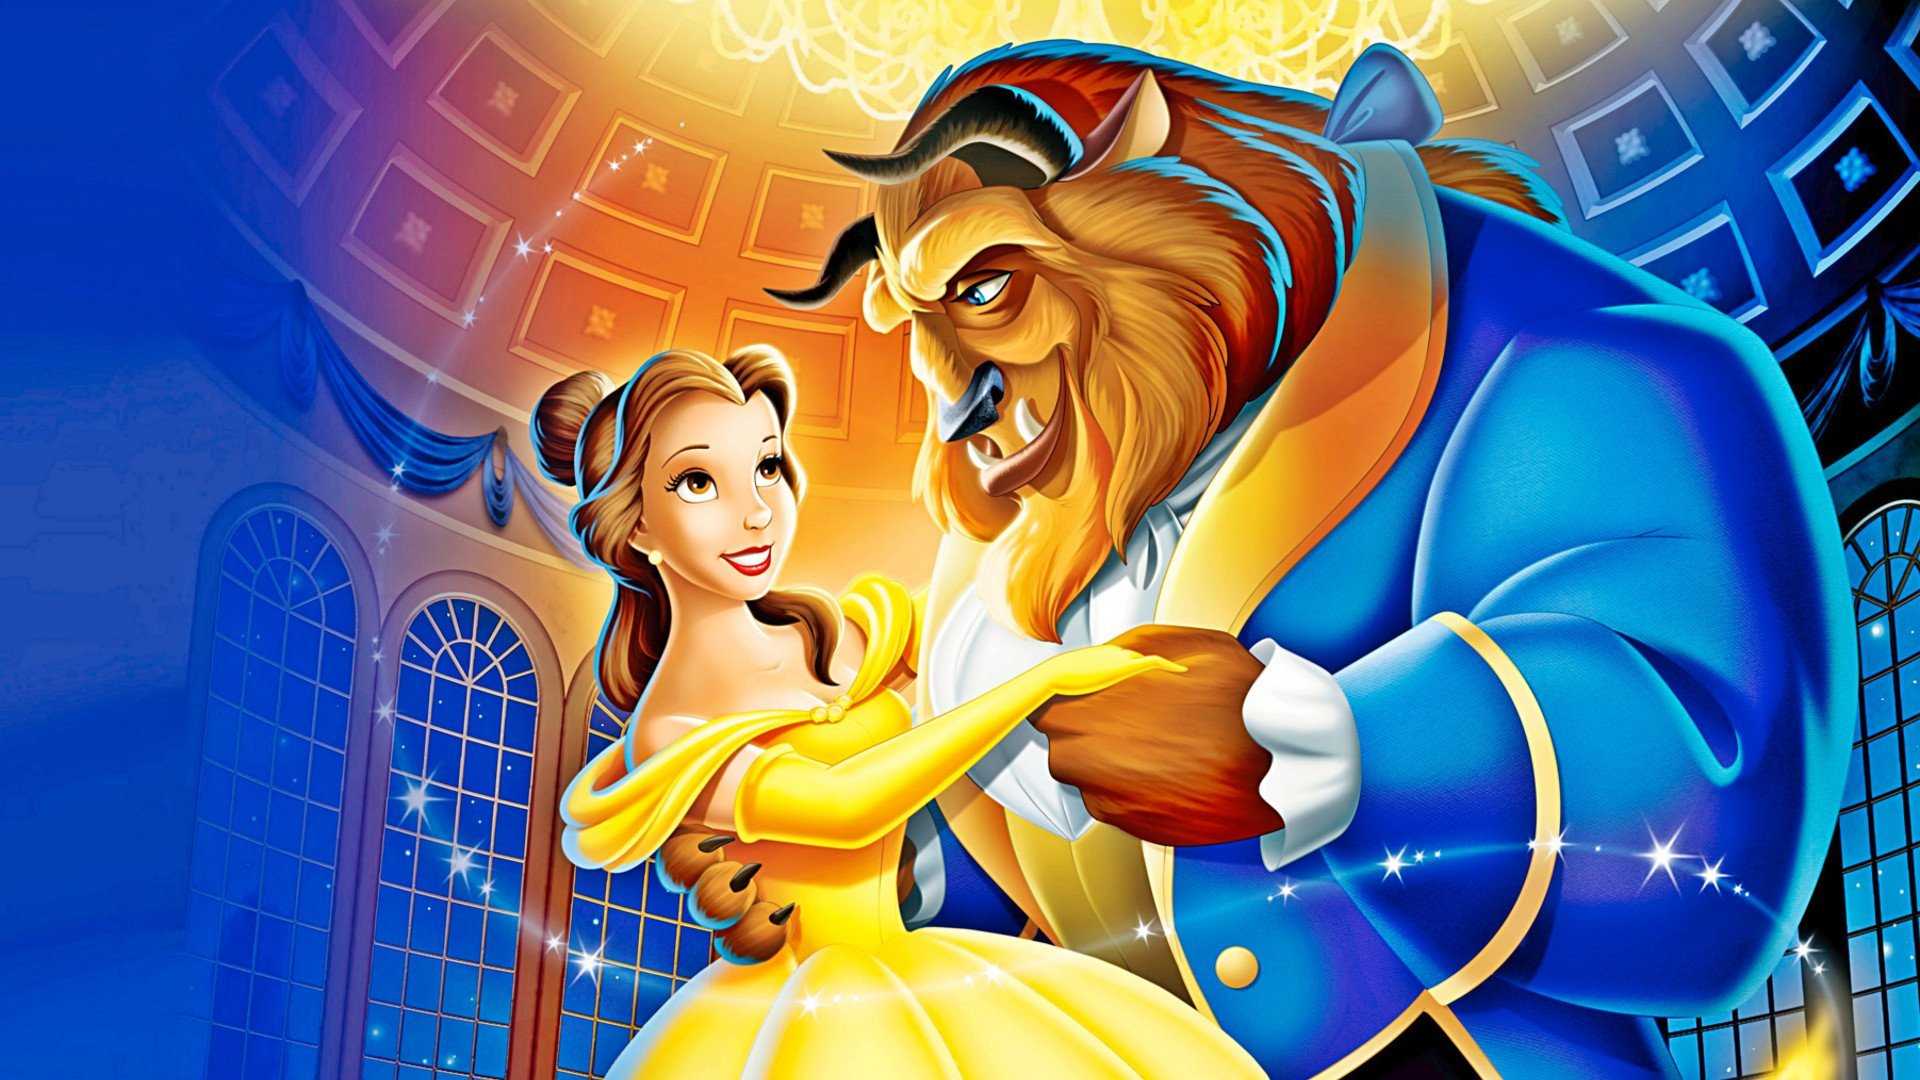 Beauty And The Beast's 'gay Moment' May Have Been Much